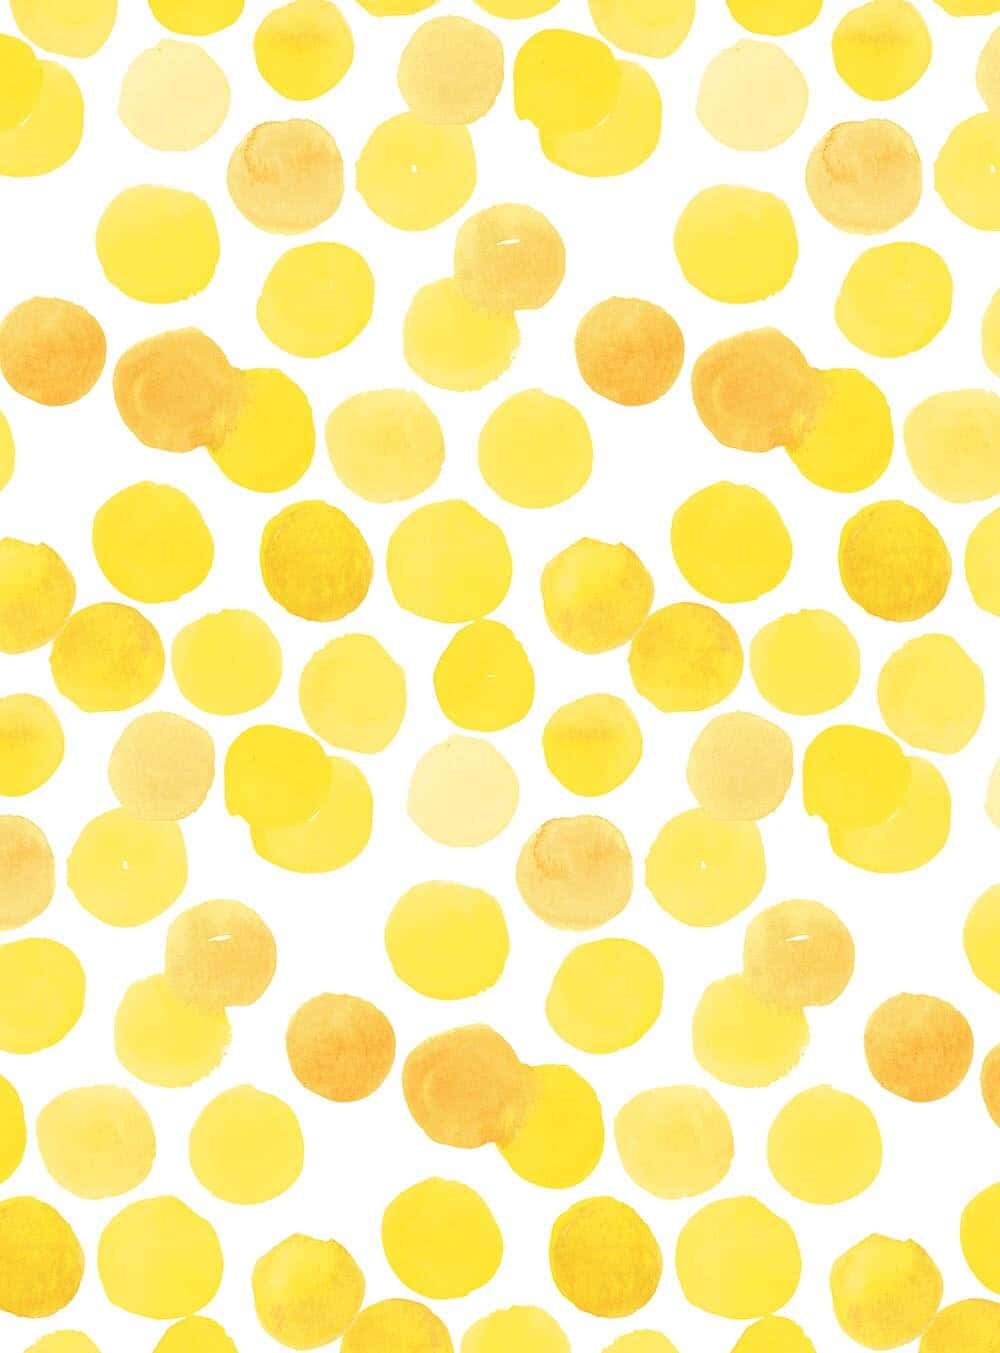 A gentle, pale yellow patterned background.